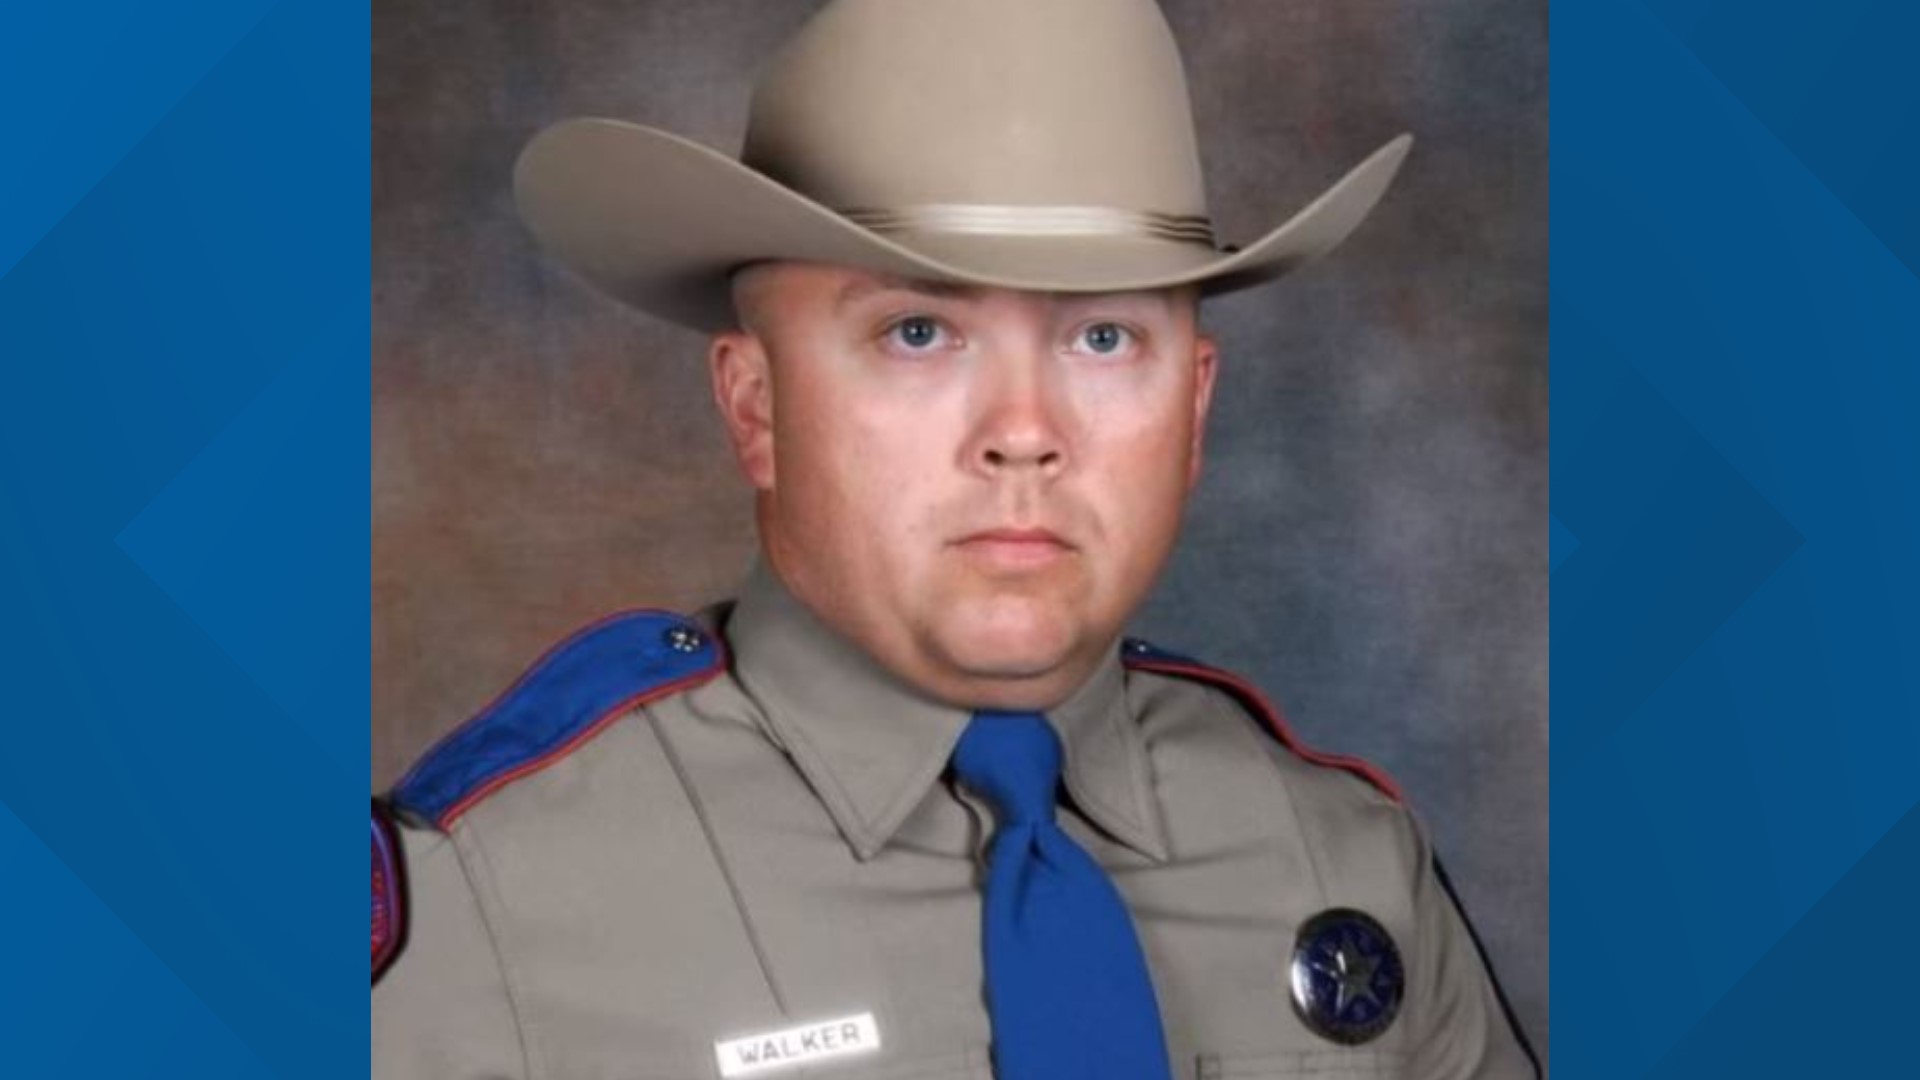 Chad Walker was reported shot in the head and abdomen by DeArthur Pinson Jr. near Mexia, the Texas DPS Officers Association reported.